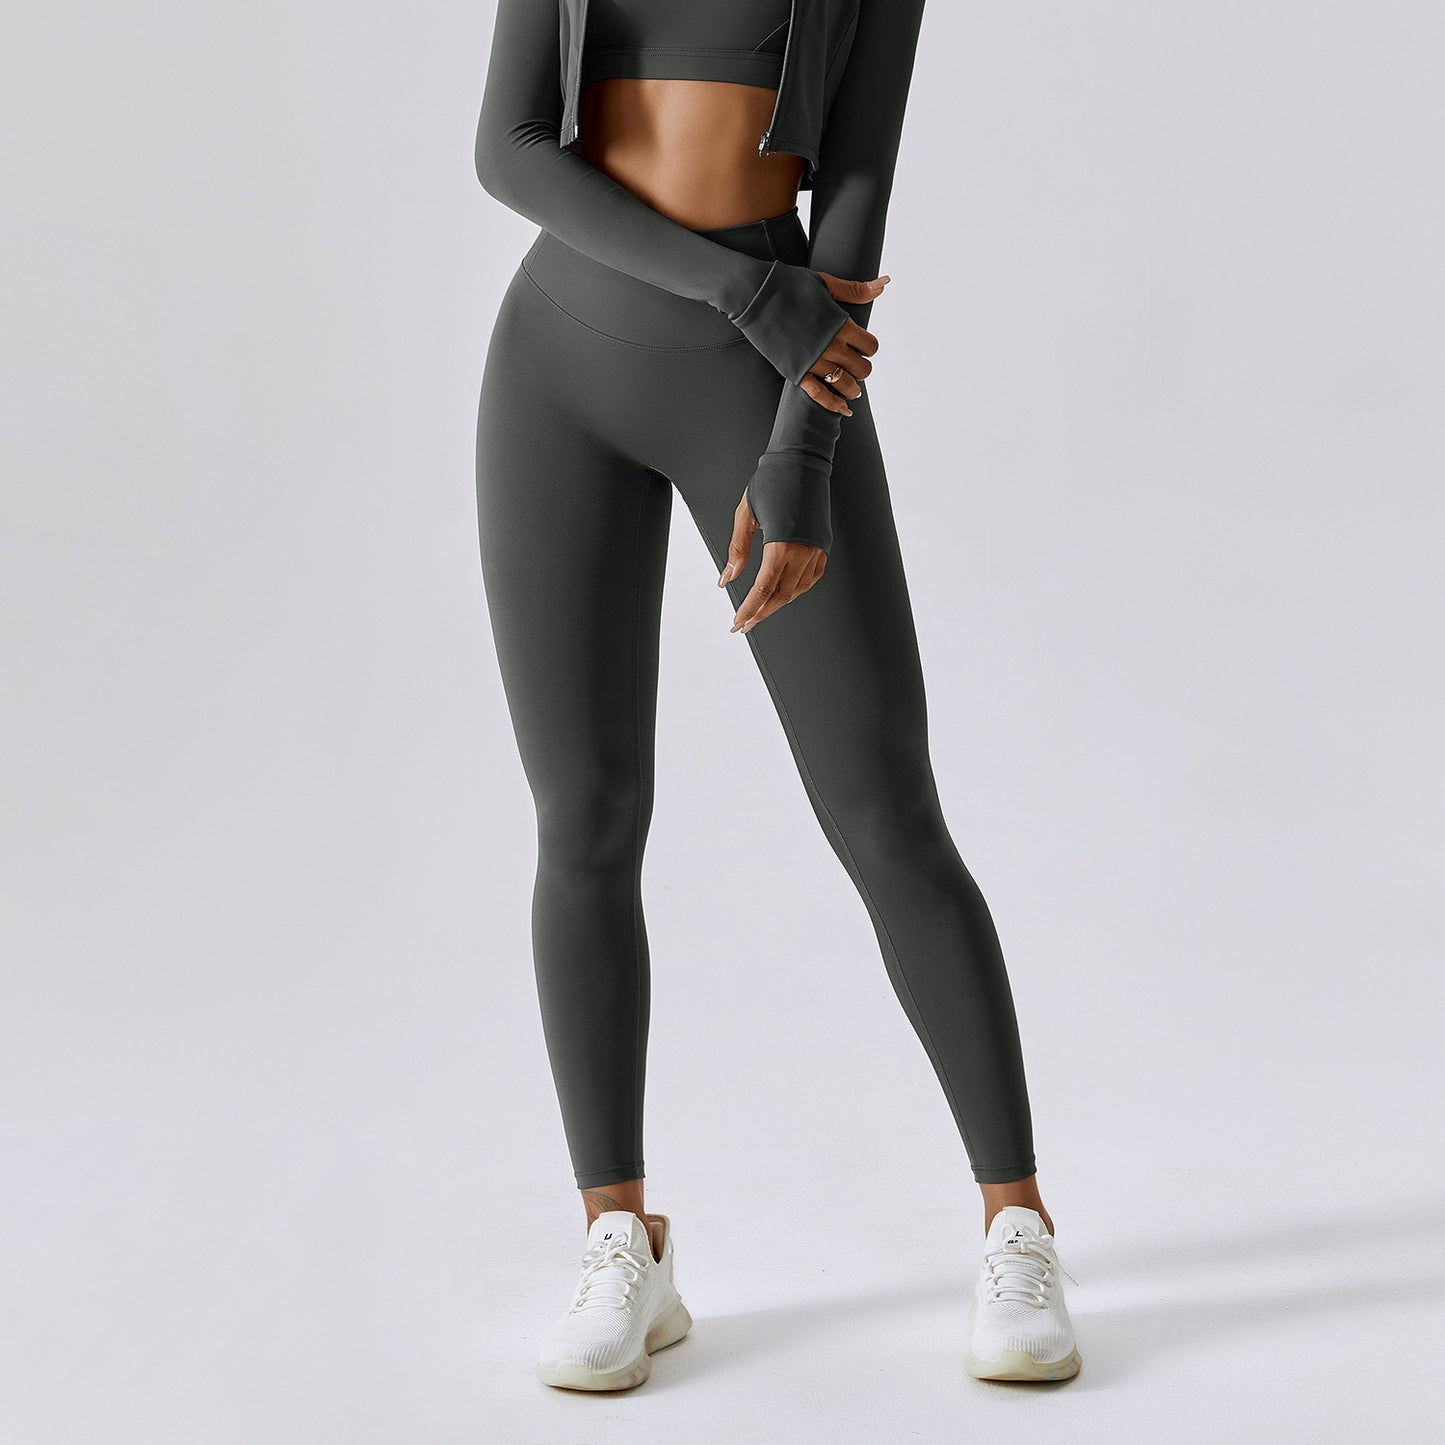 Solid color buttock lift quick-dry exercise Leggings